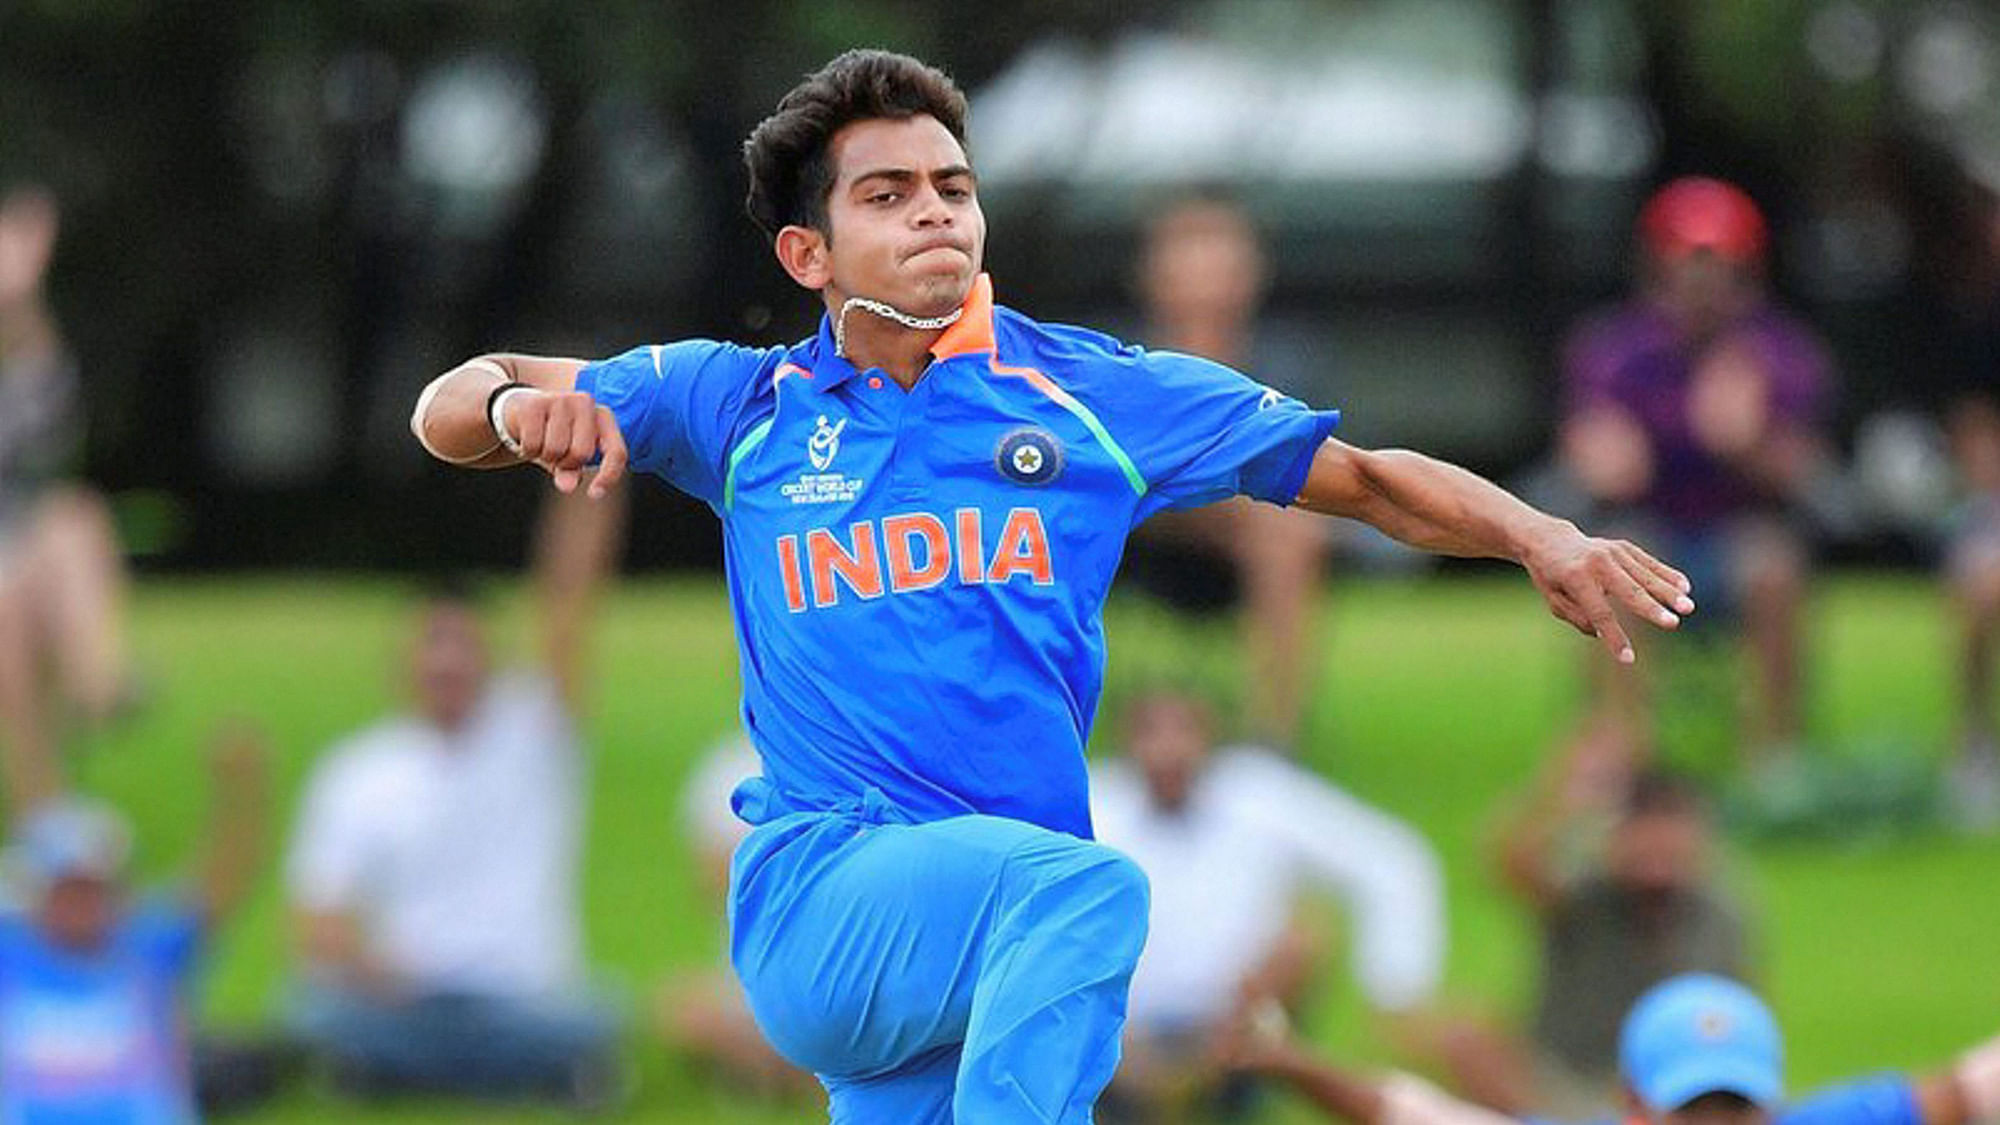  Kamlesh Nagarkoti celebrates after taking a wicket in the U-19 World Cup final against Australia.